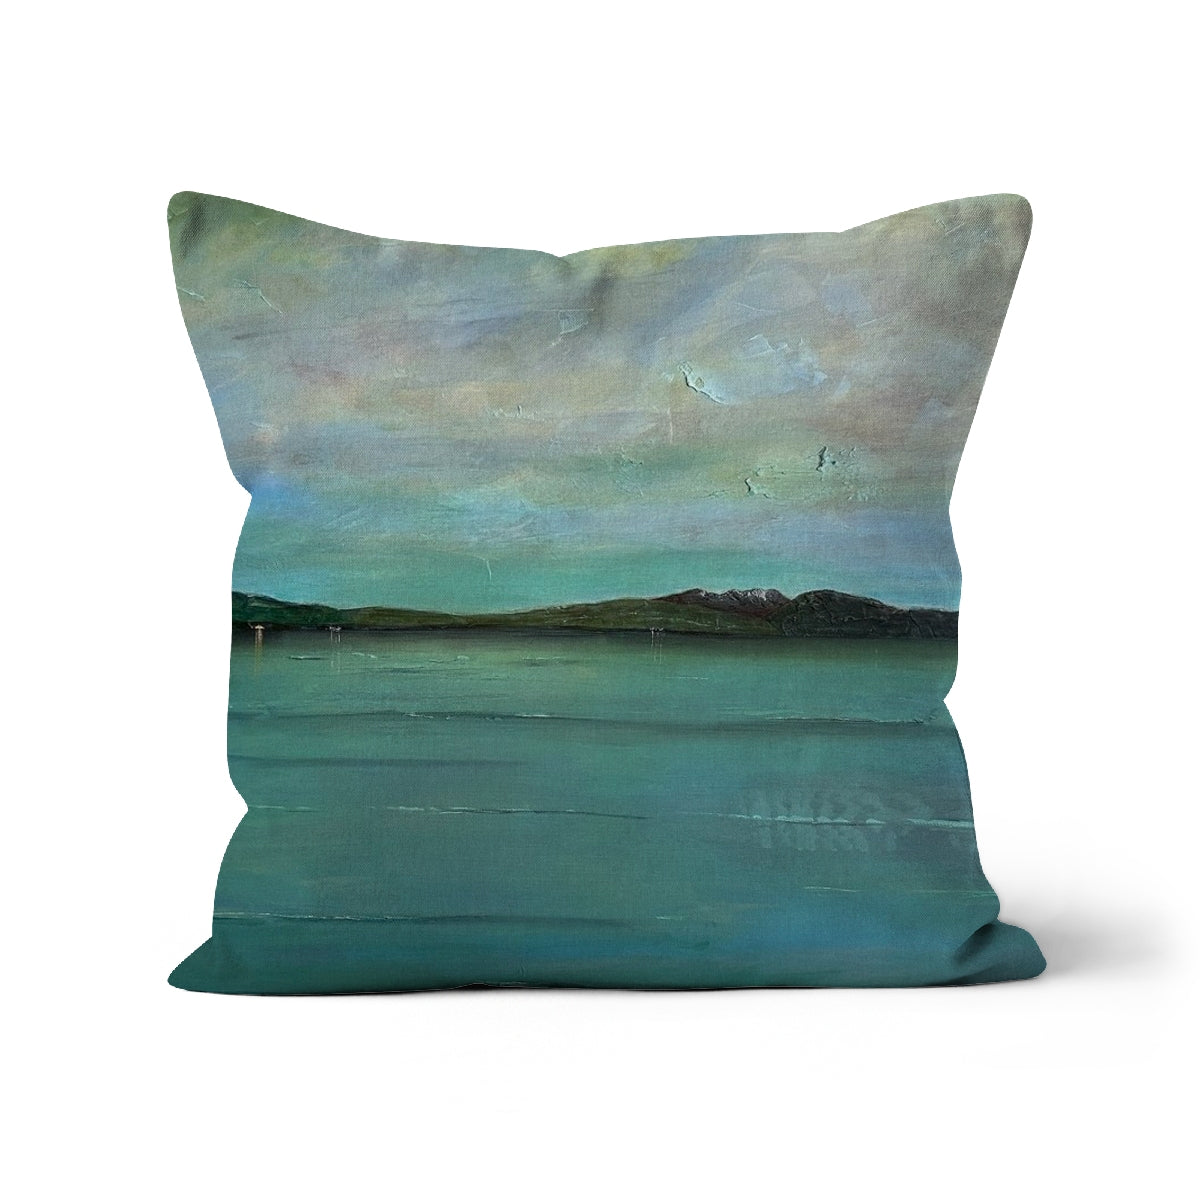 An Ethereal Loch Lomond Art Gifts Cushion-Cushions-Scottish Lochs & Mountains Art Gallery-Linen-12"x12"-Paintings, Prints, Homeware, Art Gifts From Scotland By Scottish Artist Kevin Hunter